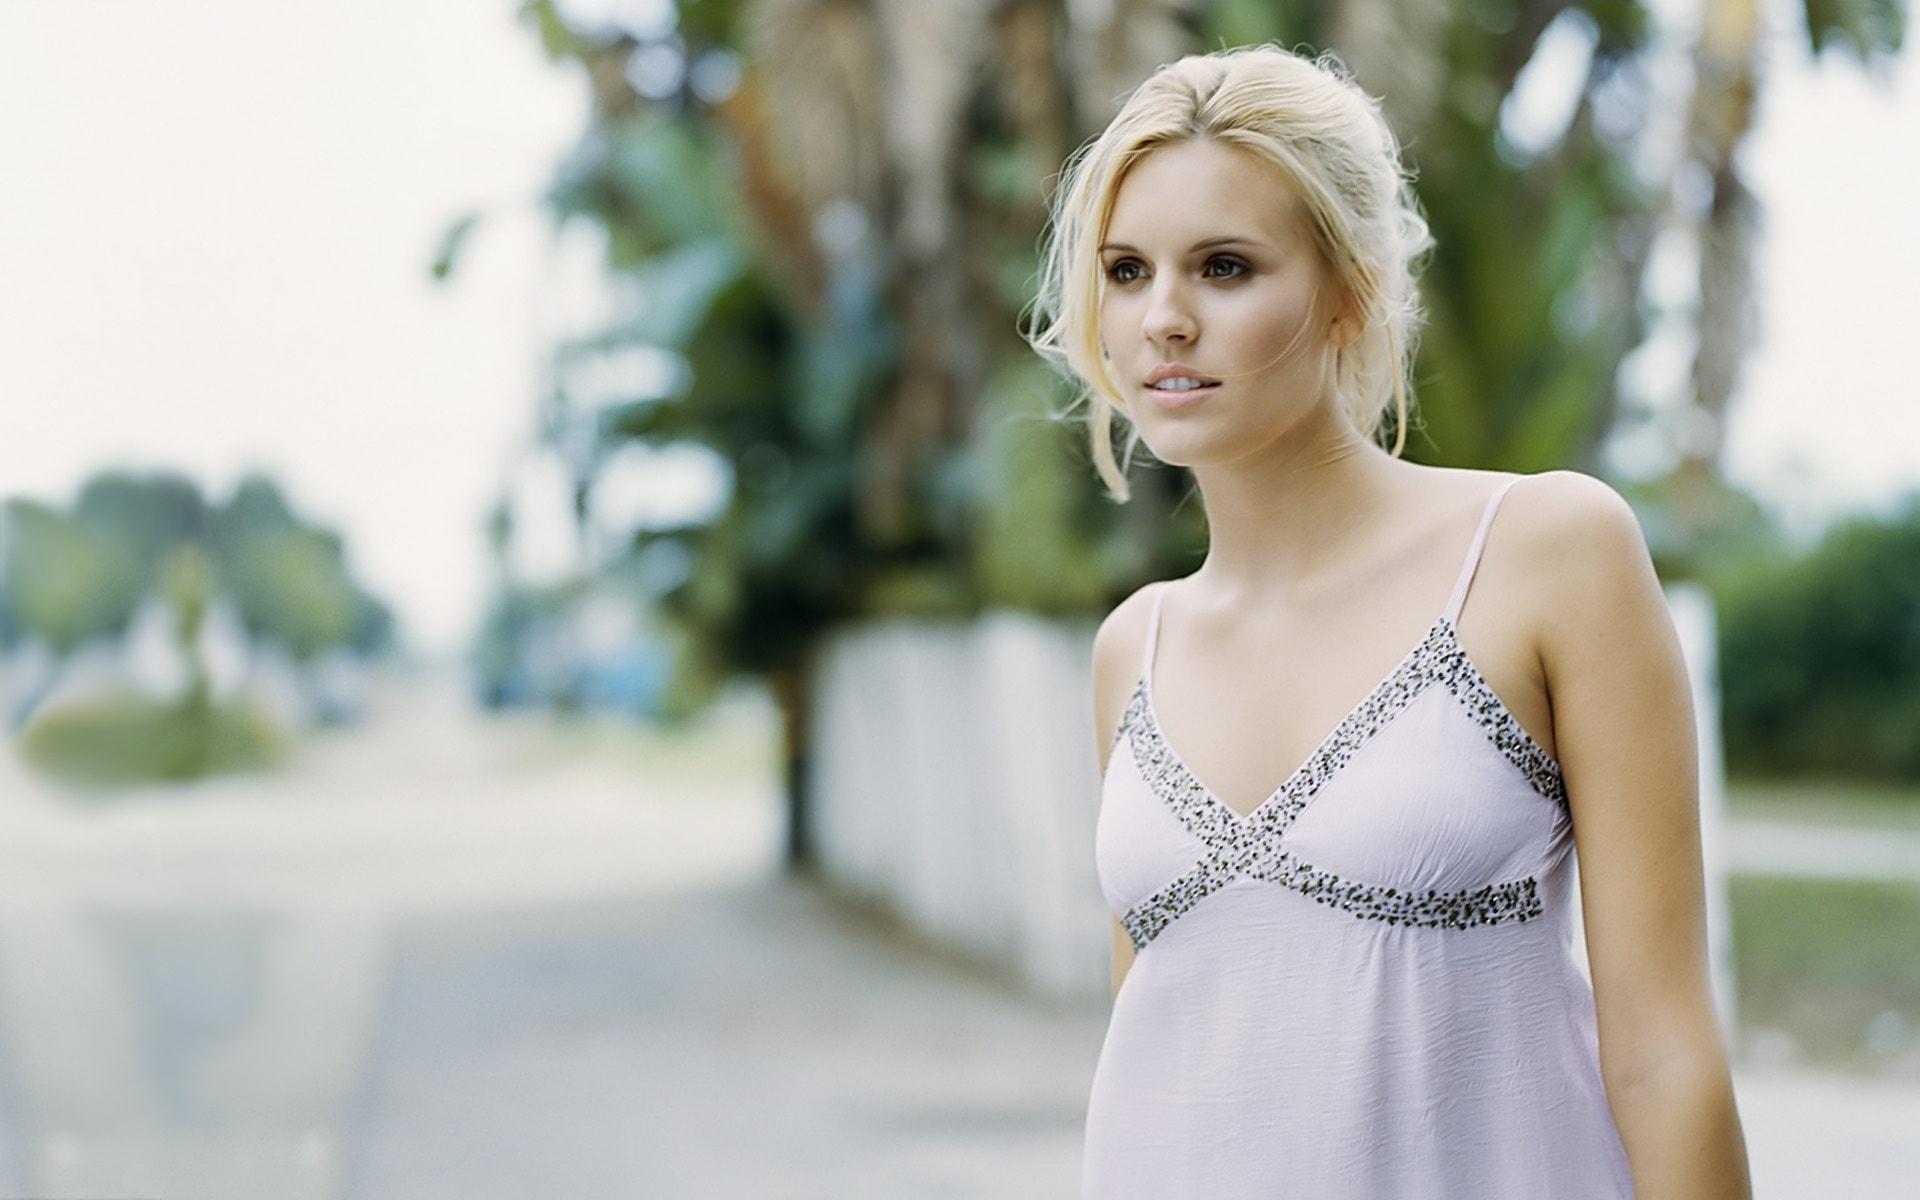 65+ Hot Pictures Of Maggie Grace Are Too Sexy For All Of Us | Best Of Comic Books